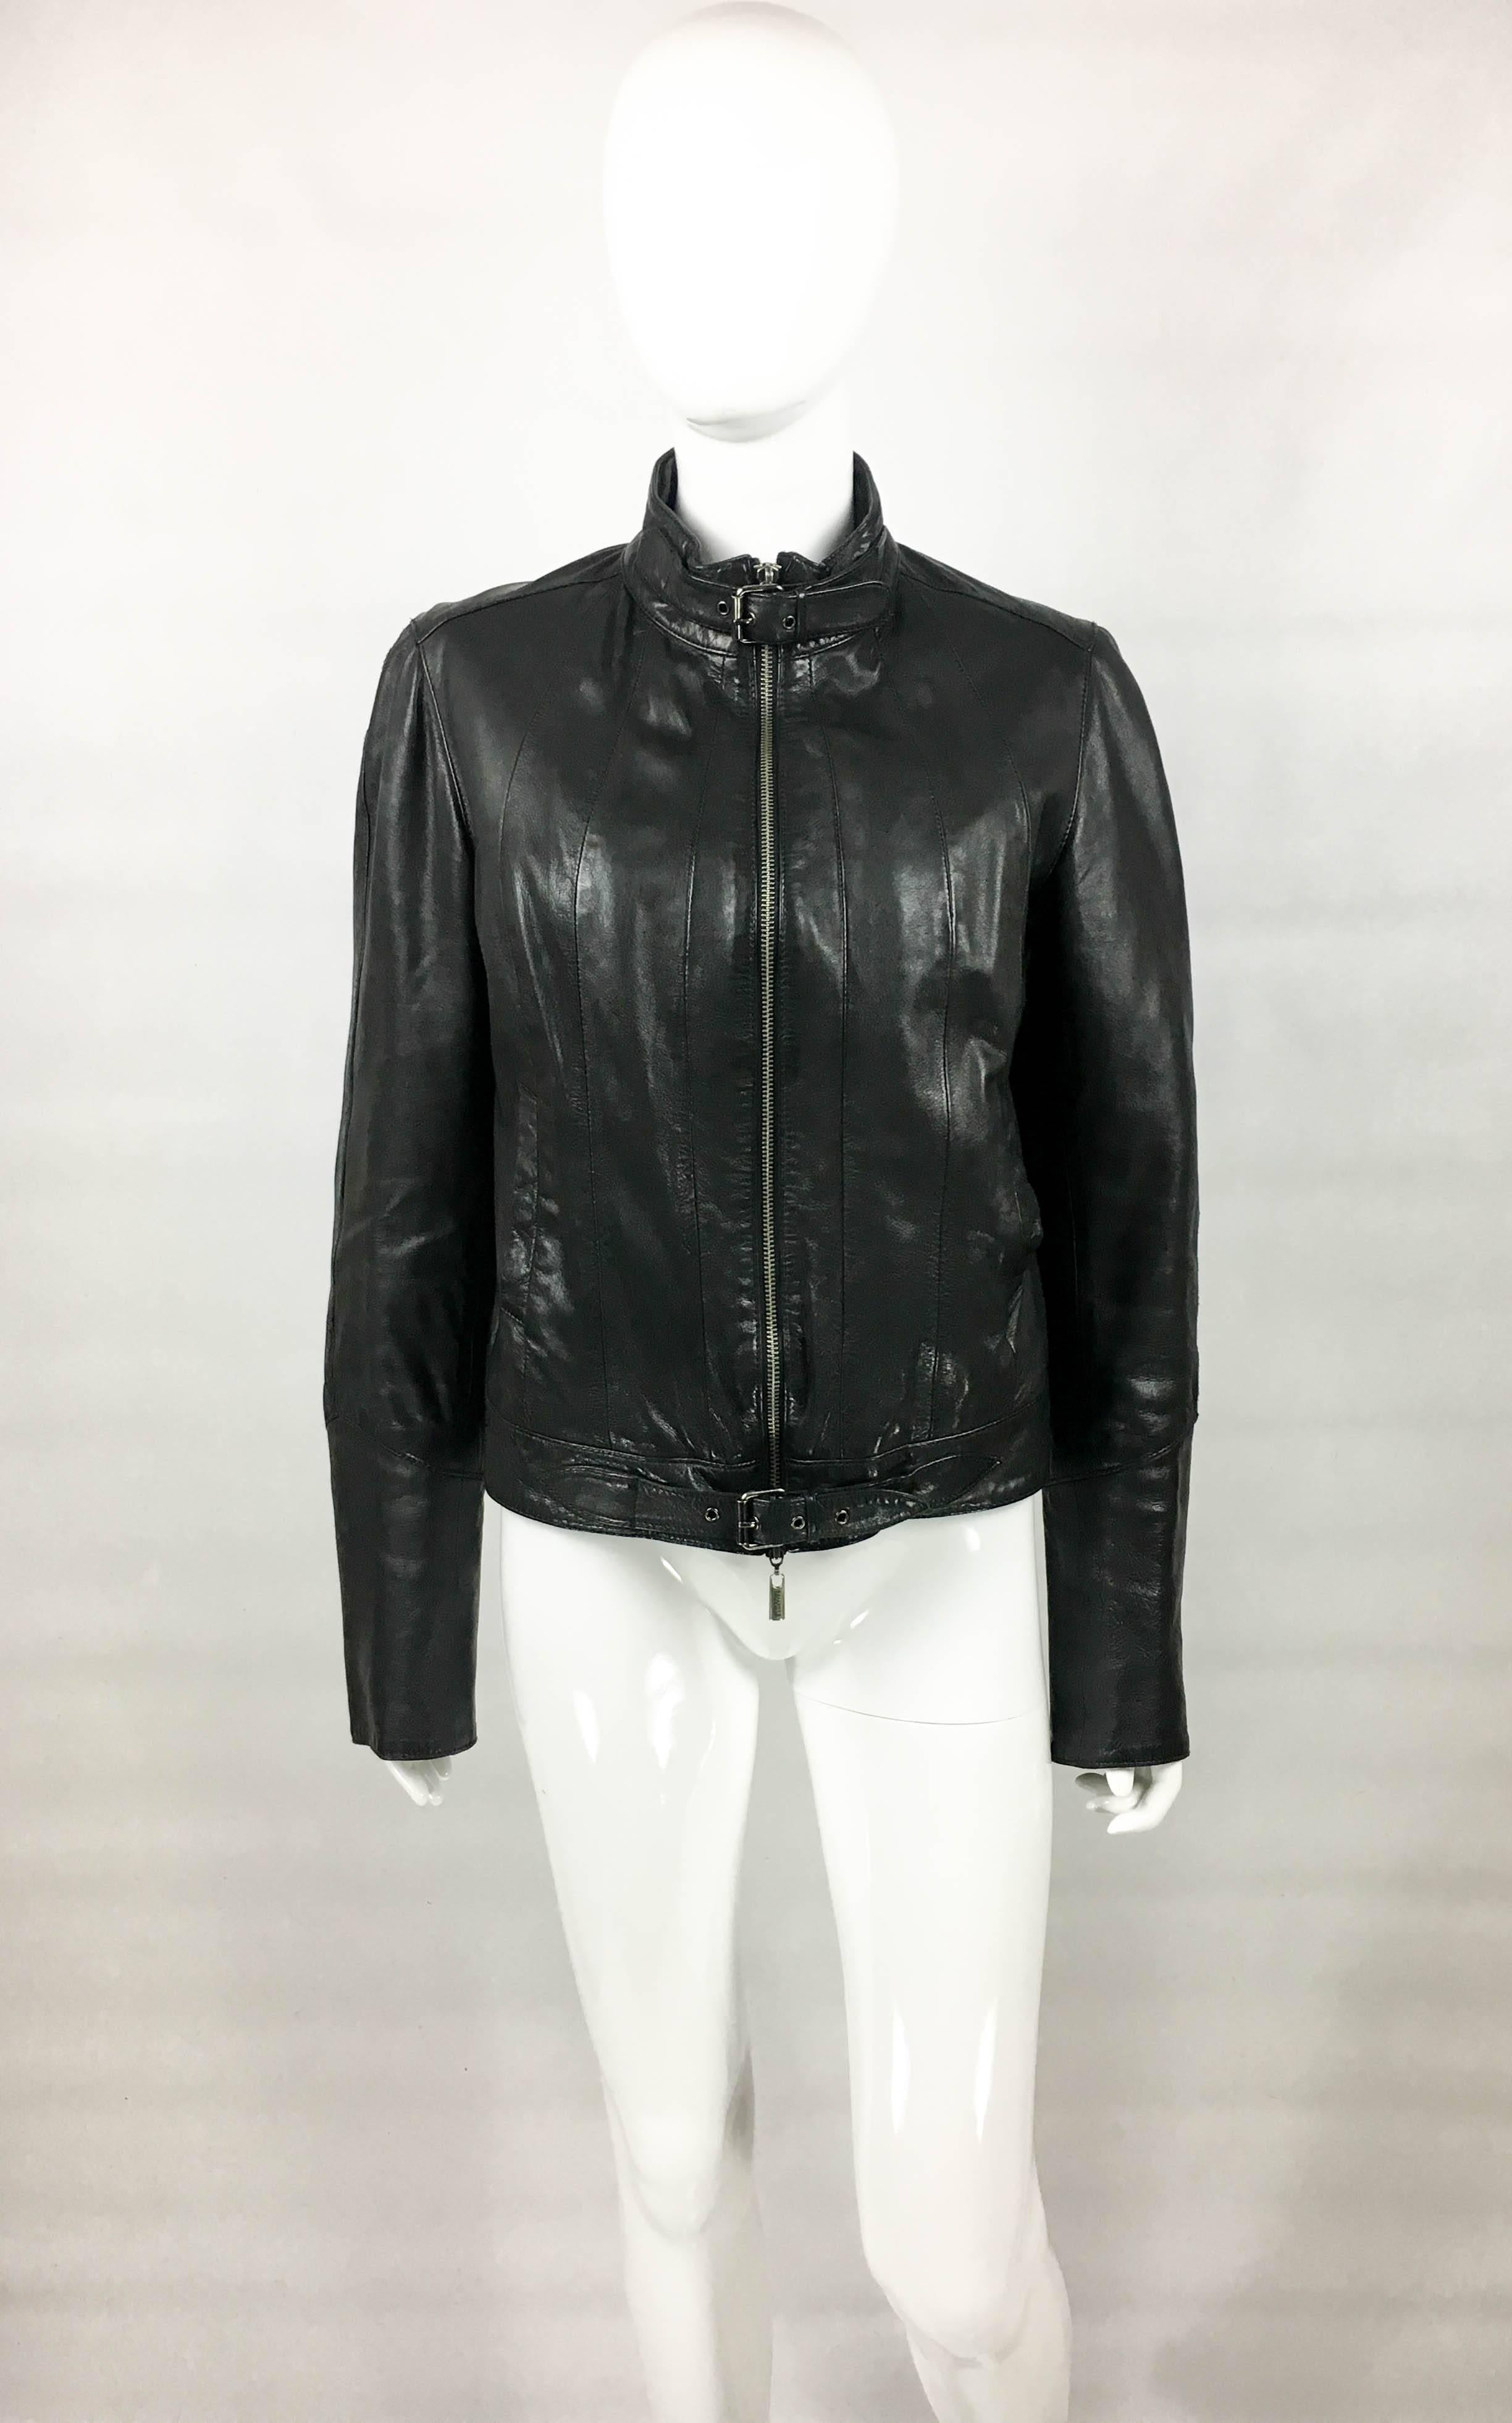 Jean Paul Gaultier Black Leather Biker Jacket With Quilted Lining. This stylish jacket by Jean Paul Gaultier is made in black leather and is constructed with panels, which creates interesting patterns. Closure is by an open-end two-way zipper,